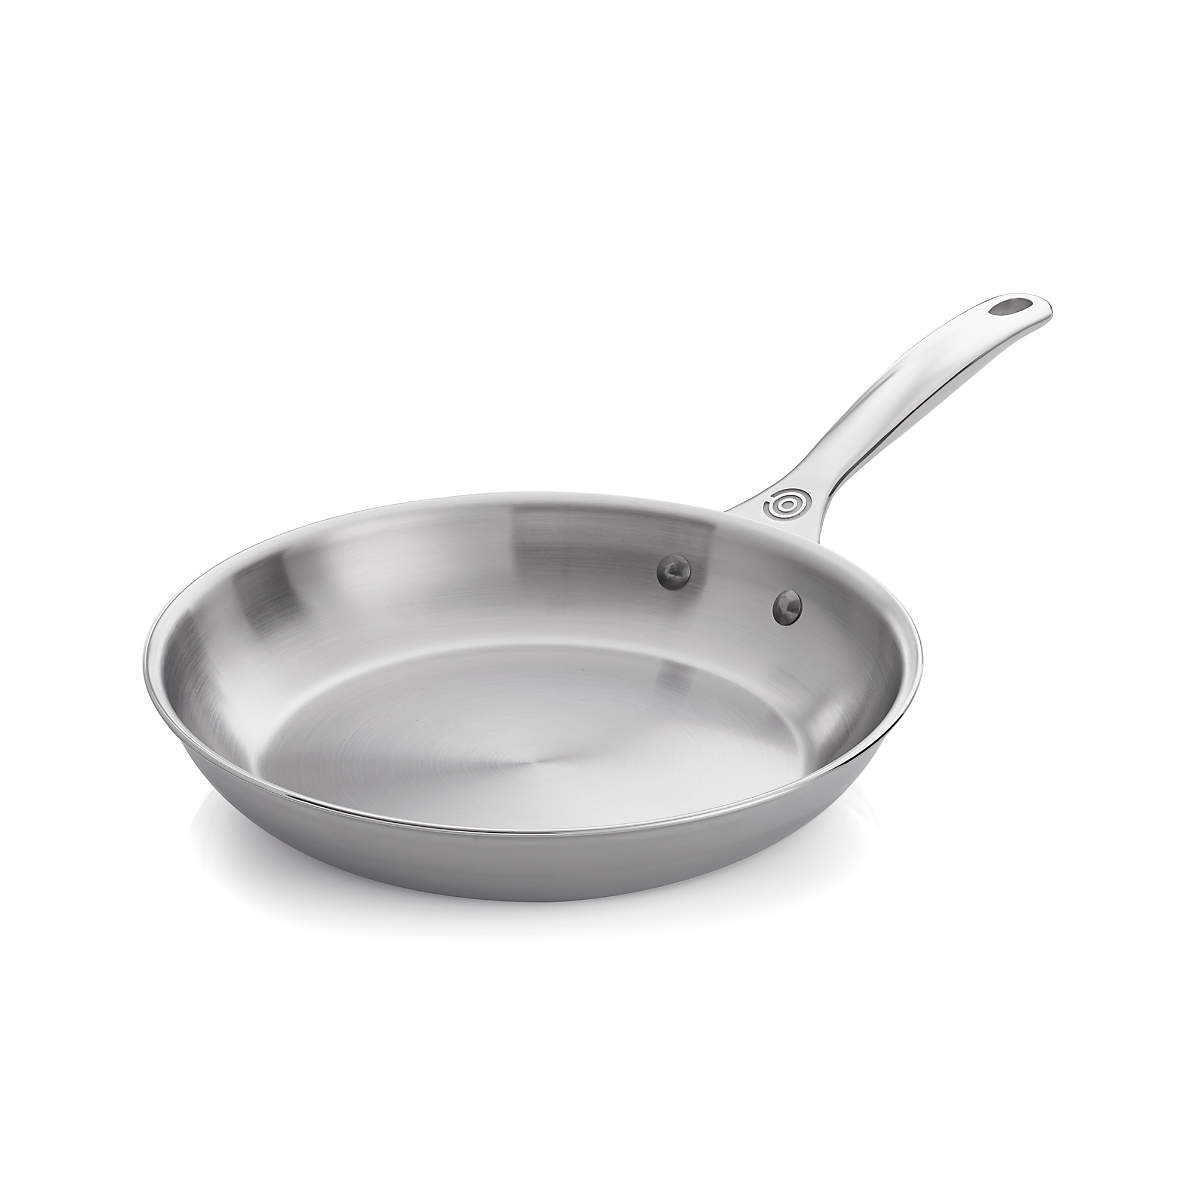 Le Creuset Stainless Steel Fry Pan 8-Inch - Fante's Kitchen Shop - Since  1906